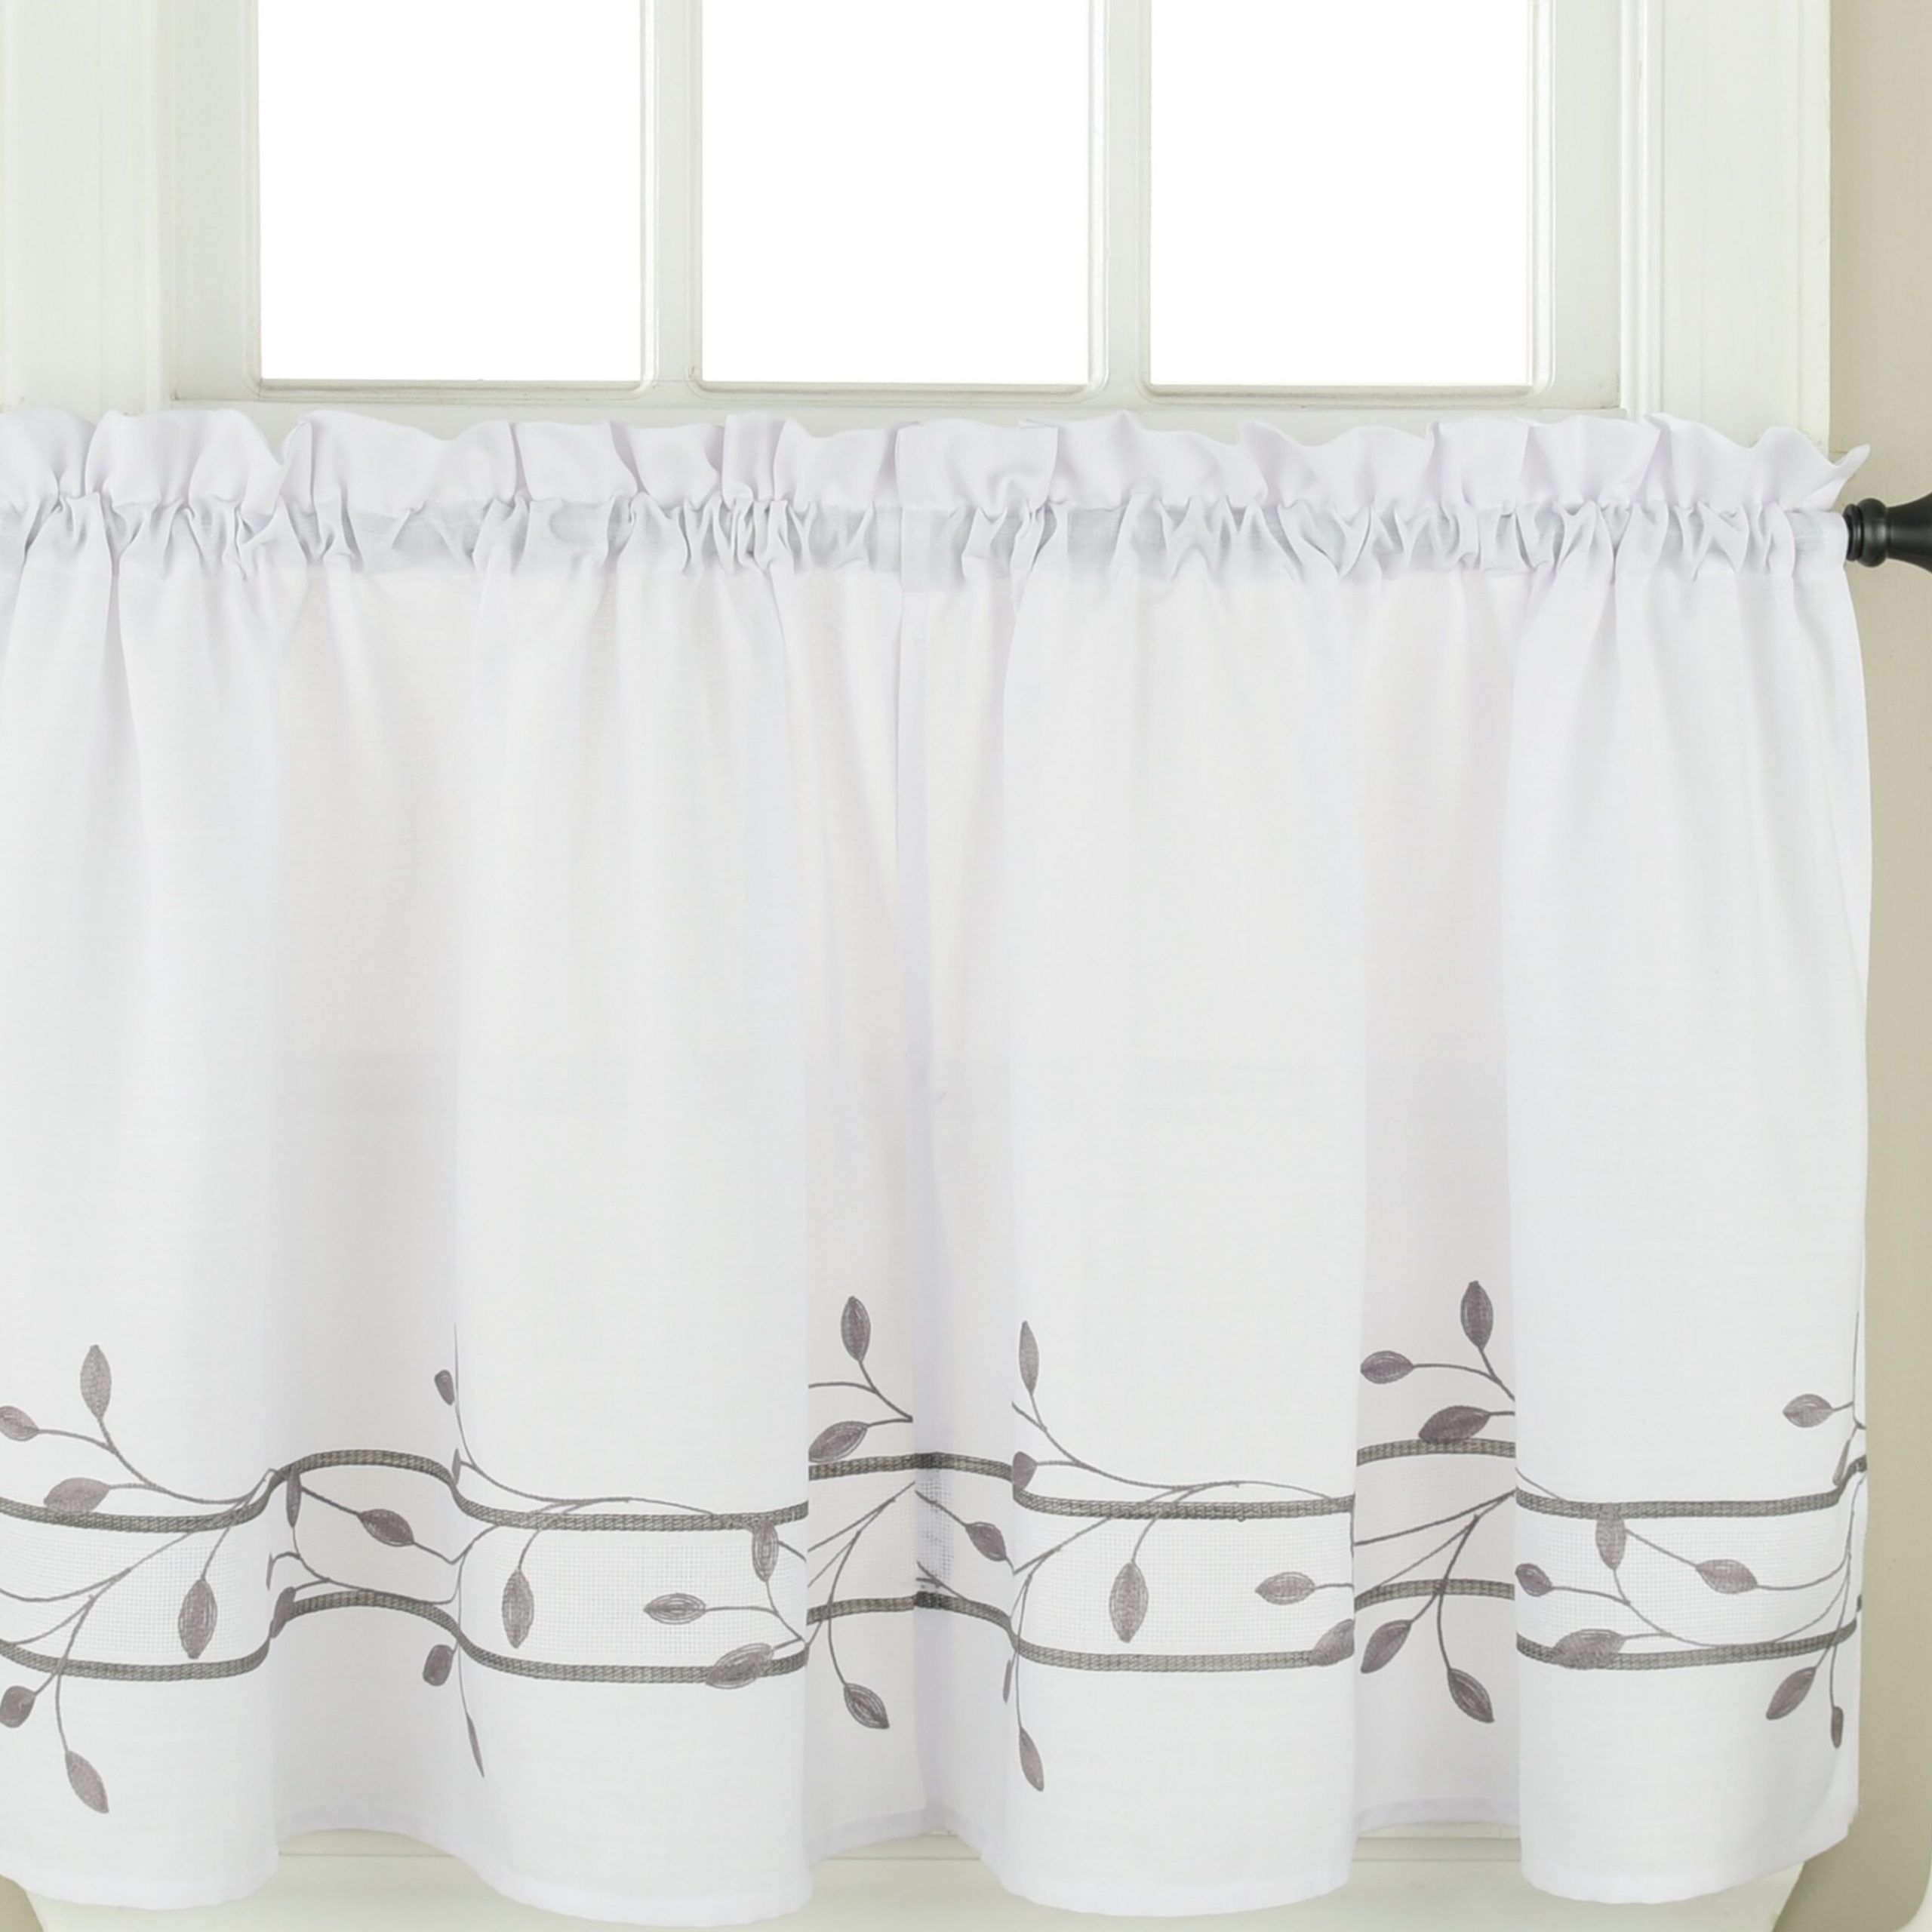 Bouck Embroidered Tier Cafe Curtain In Coffee Embroidered Kitchen Curtain Tier Sets (View 19 of 20)